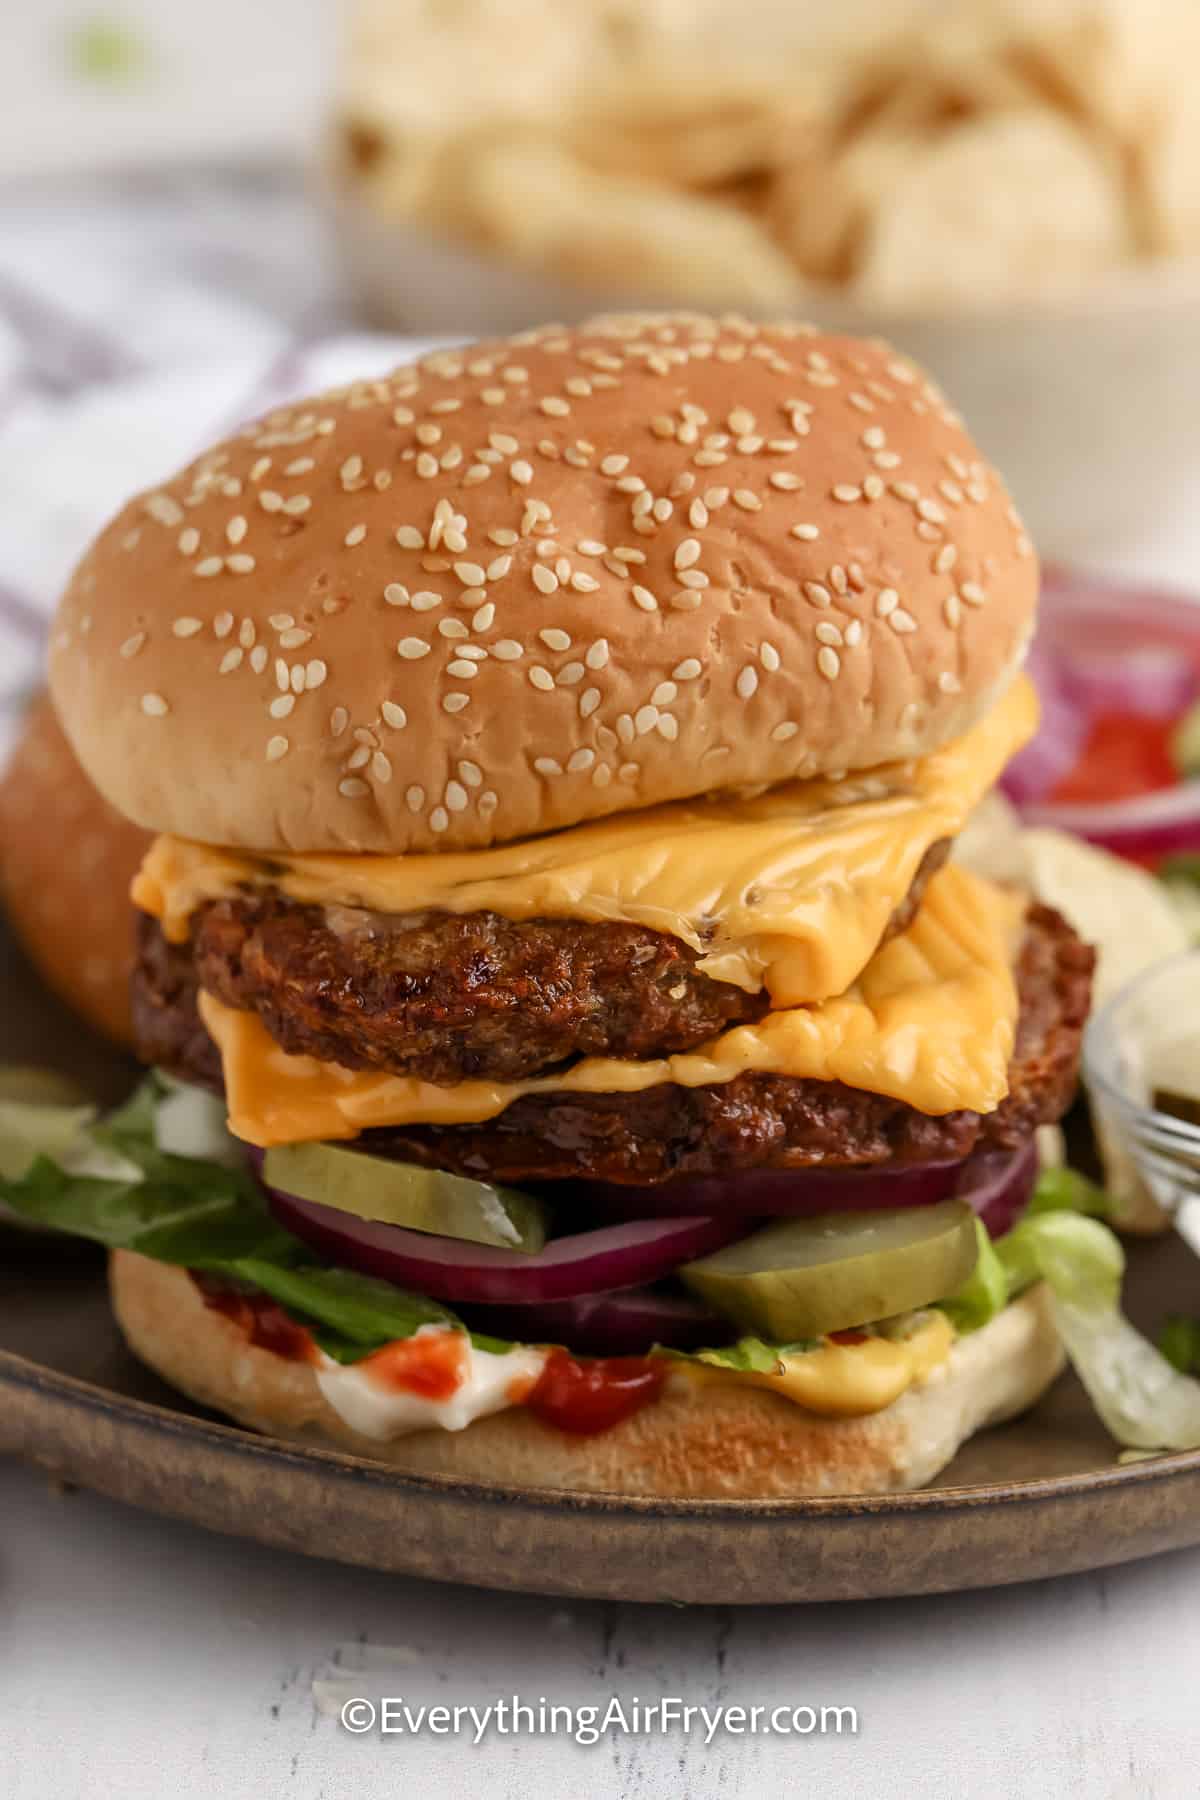 two hamburger patties stacked on a bun with an assortment of condiments